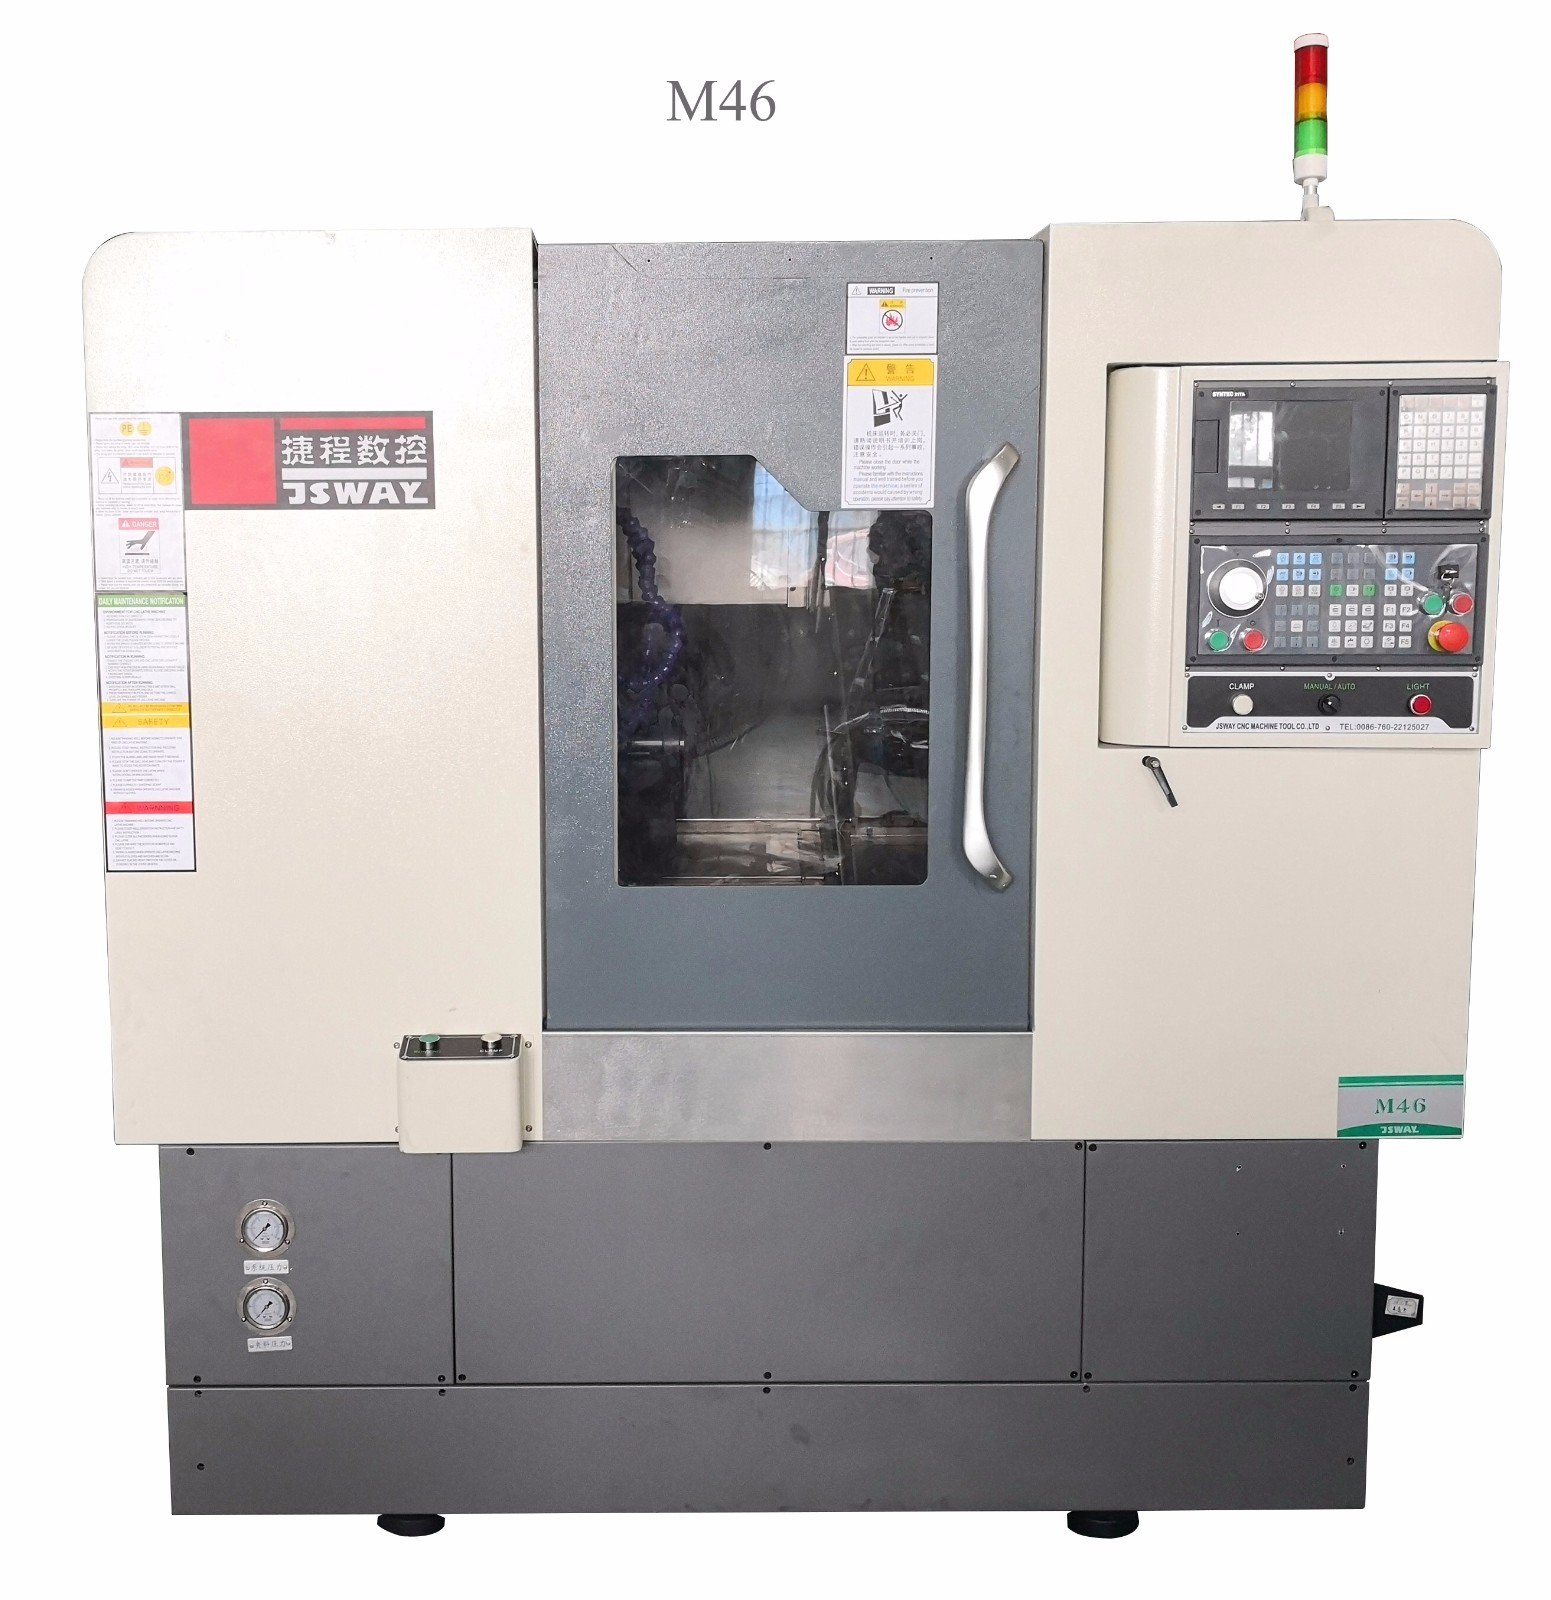 product-2020 New design 4 Axis Slant Bed turning and milling combine lathe machine M46X-JSWAY-img-40